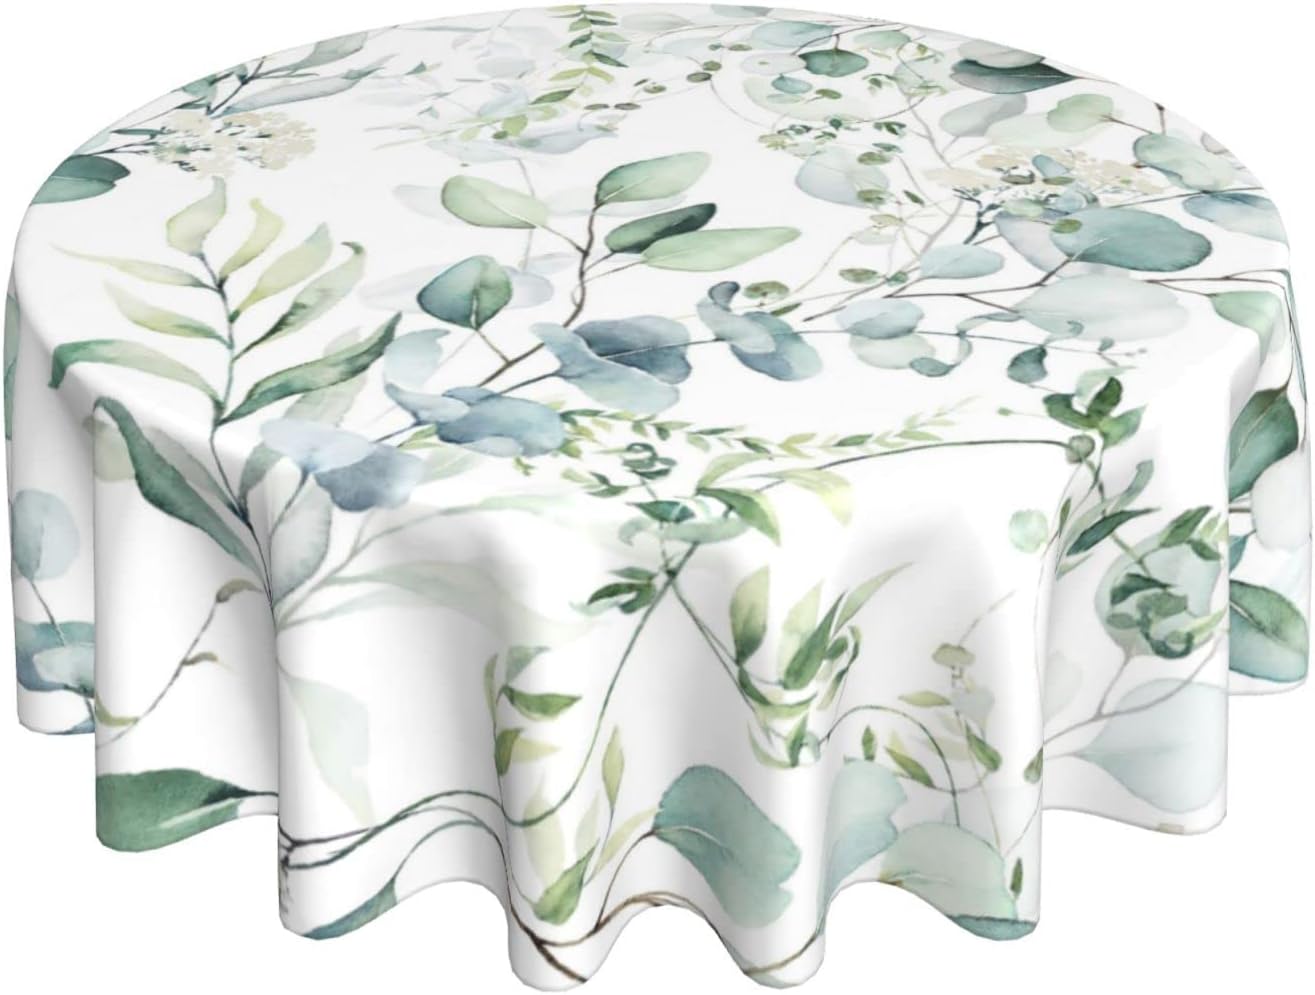 GOCGRV Green Floral Leaf Reusable Round Tablecloths Table Cloth for Round Tables Fabric 60 Inch Waterproof Washable Kitchen Dining Room